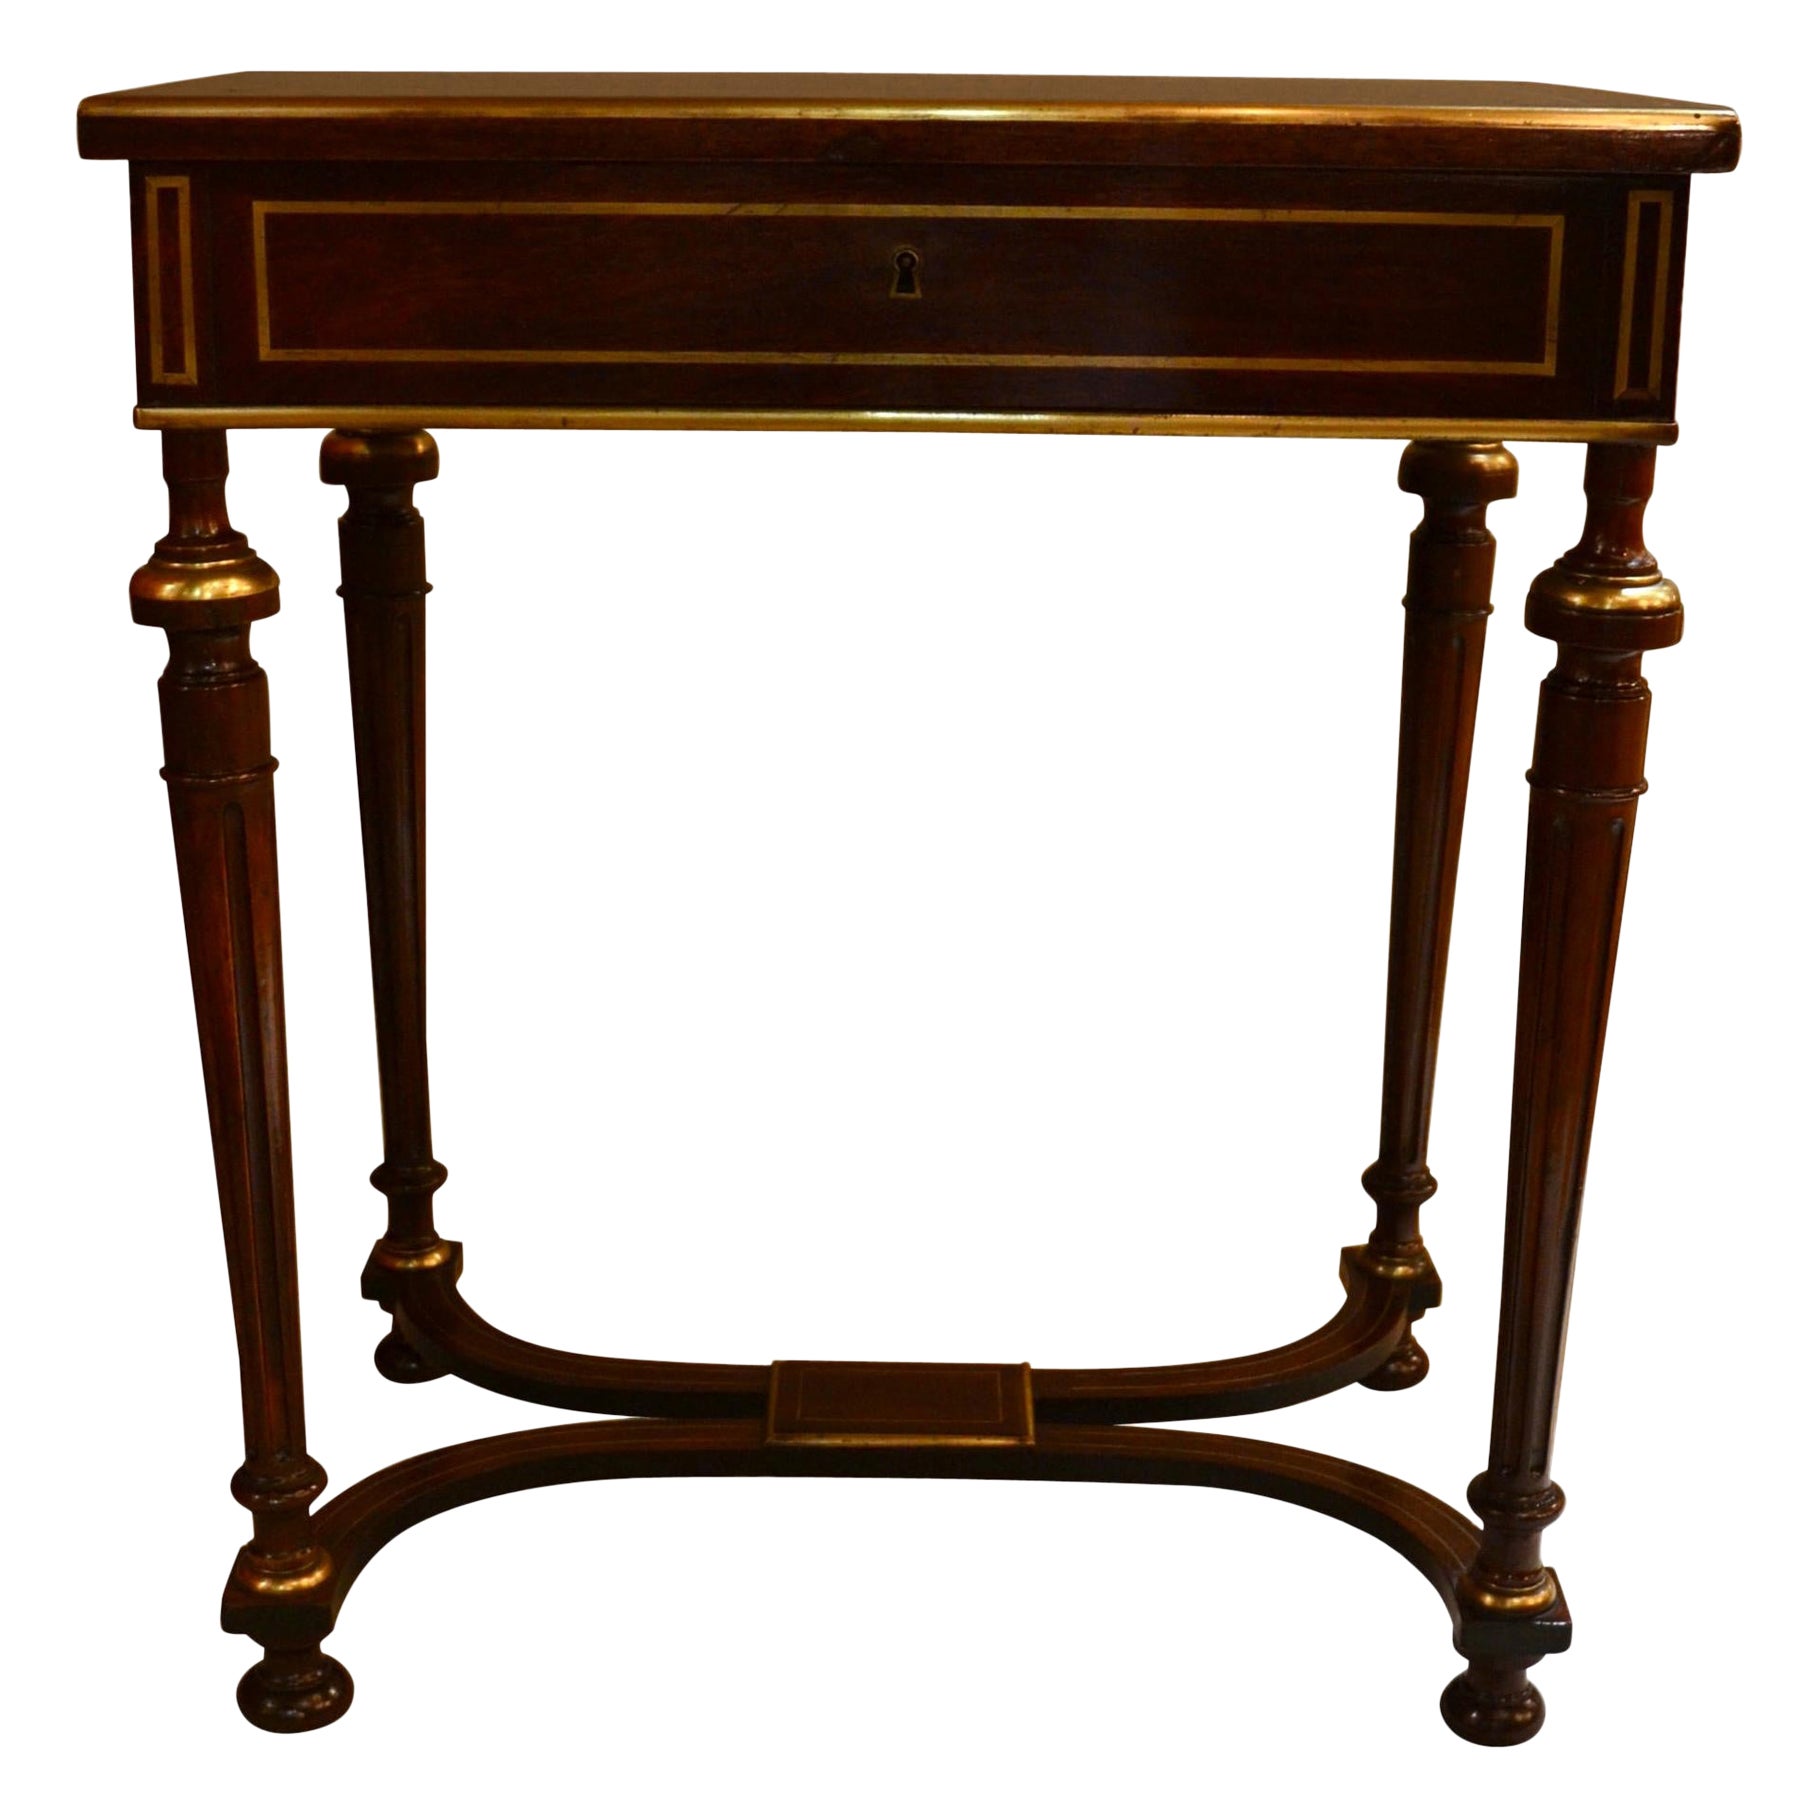 Antique French Poudreuse Vanity Table with Gold Bronze Detail, circa 1860-1870 For Sale